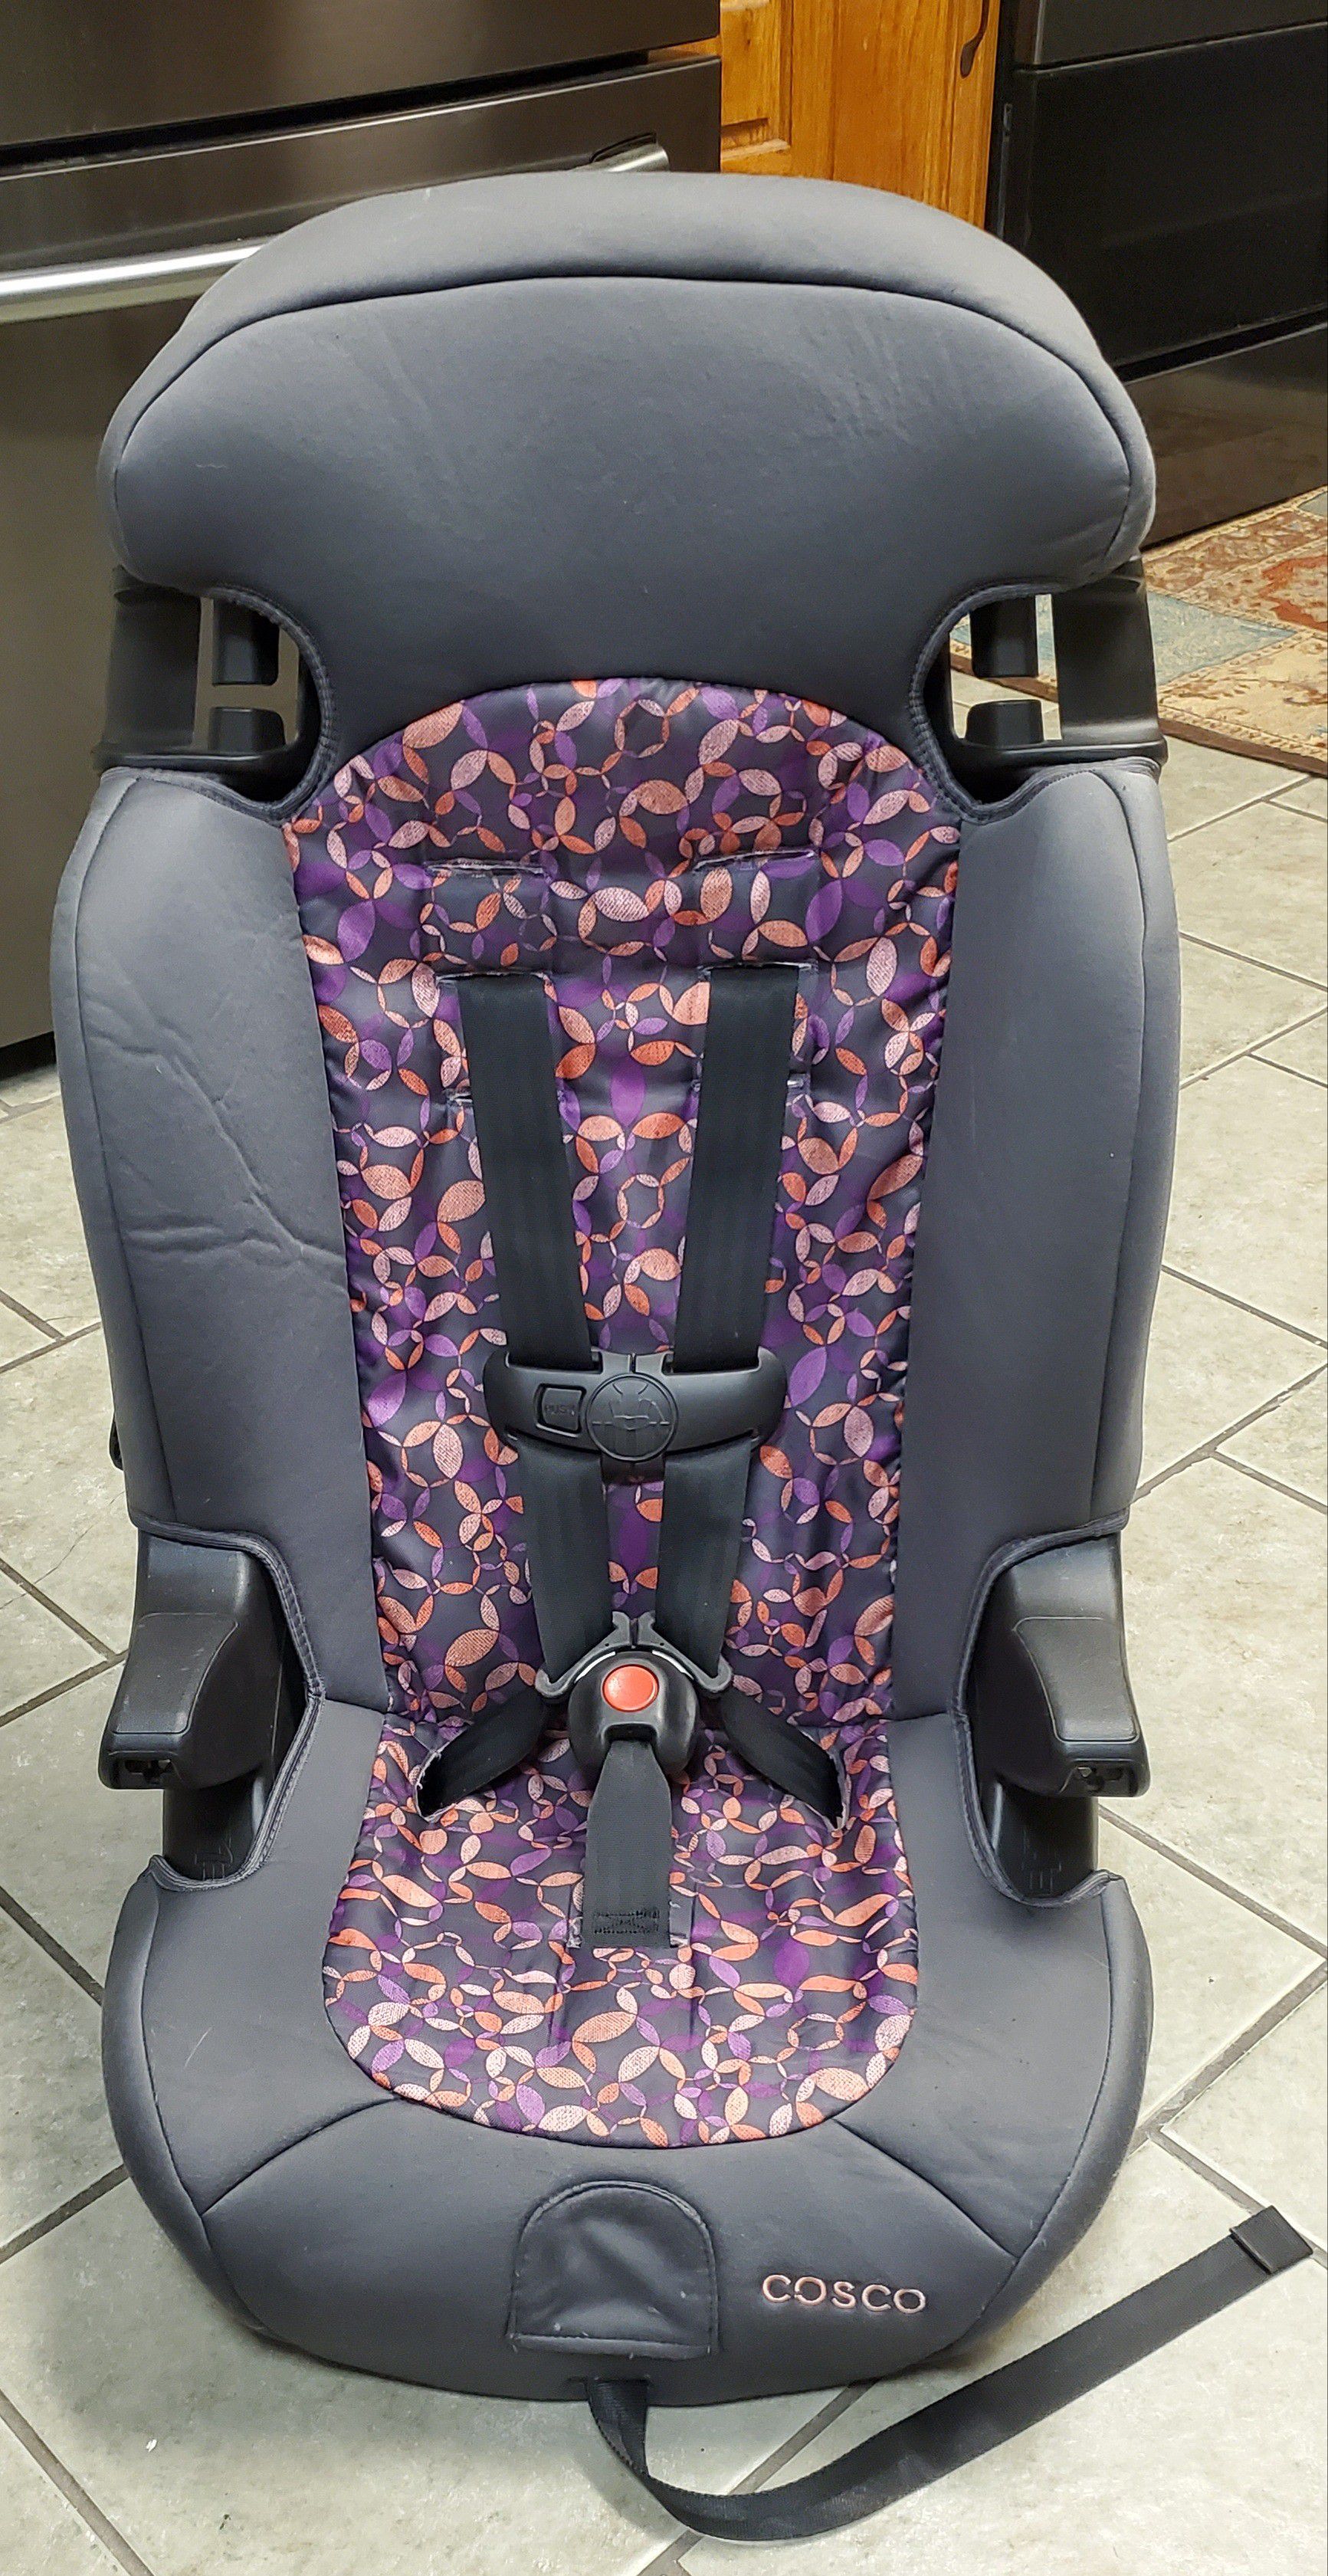 Cosco Toddler Booster Car Seat